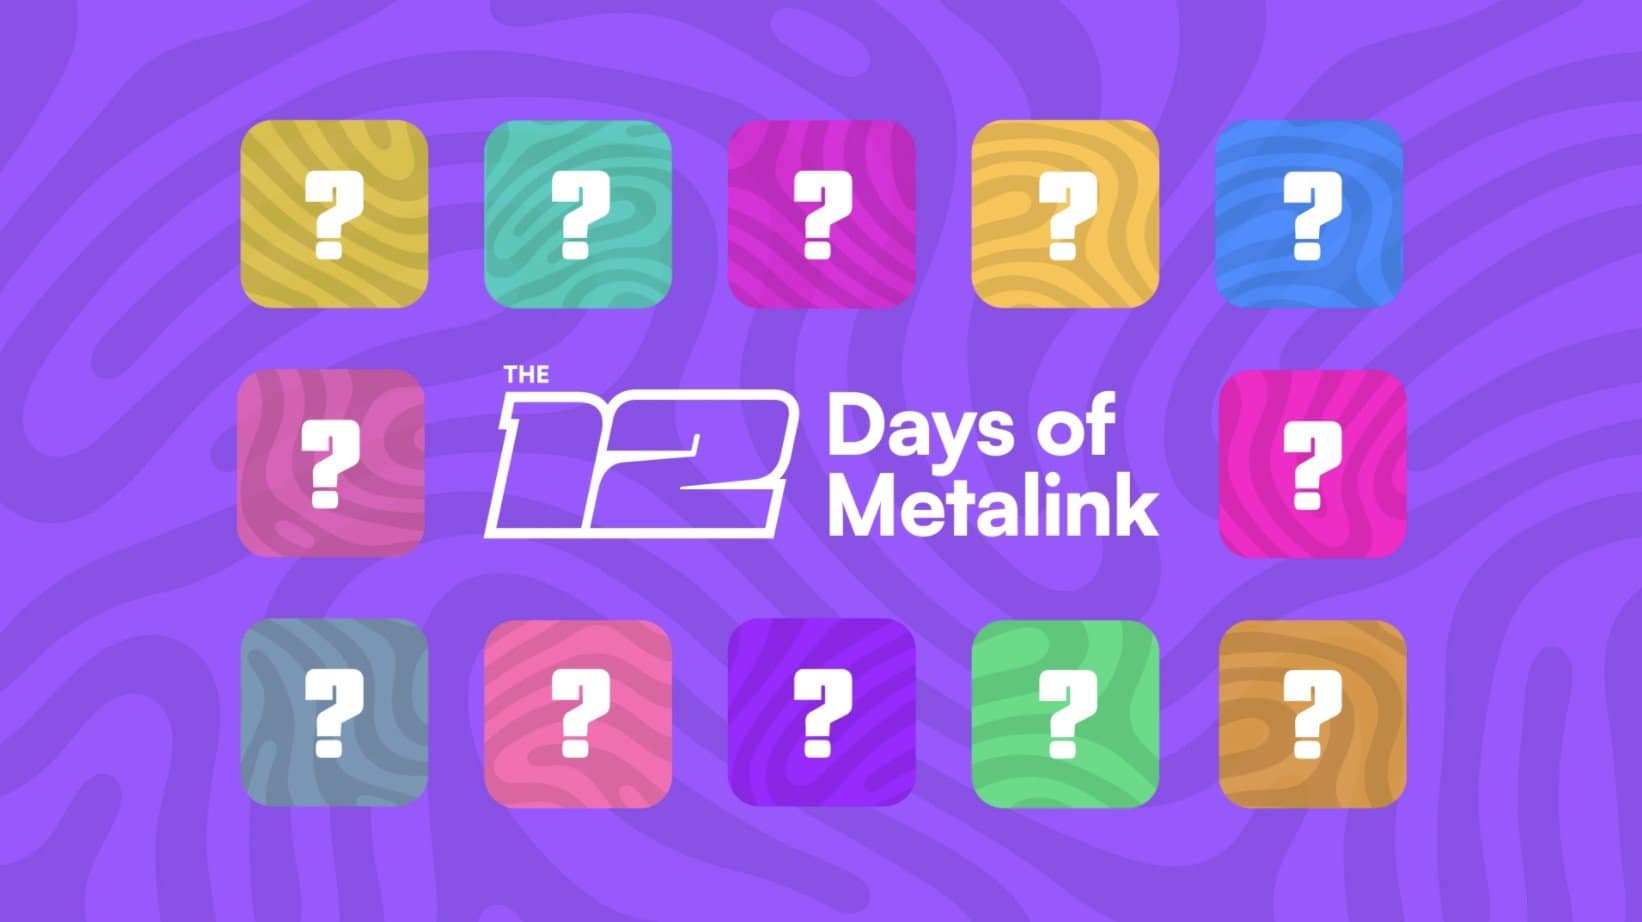 Promo Banner for "12 Days Of Metalink" Featuring NFT Wrapped Service